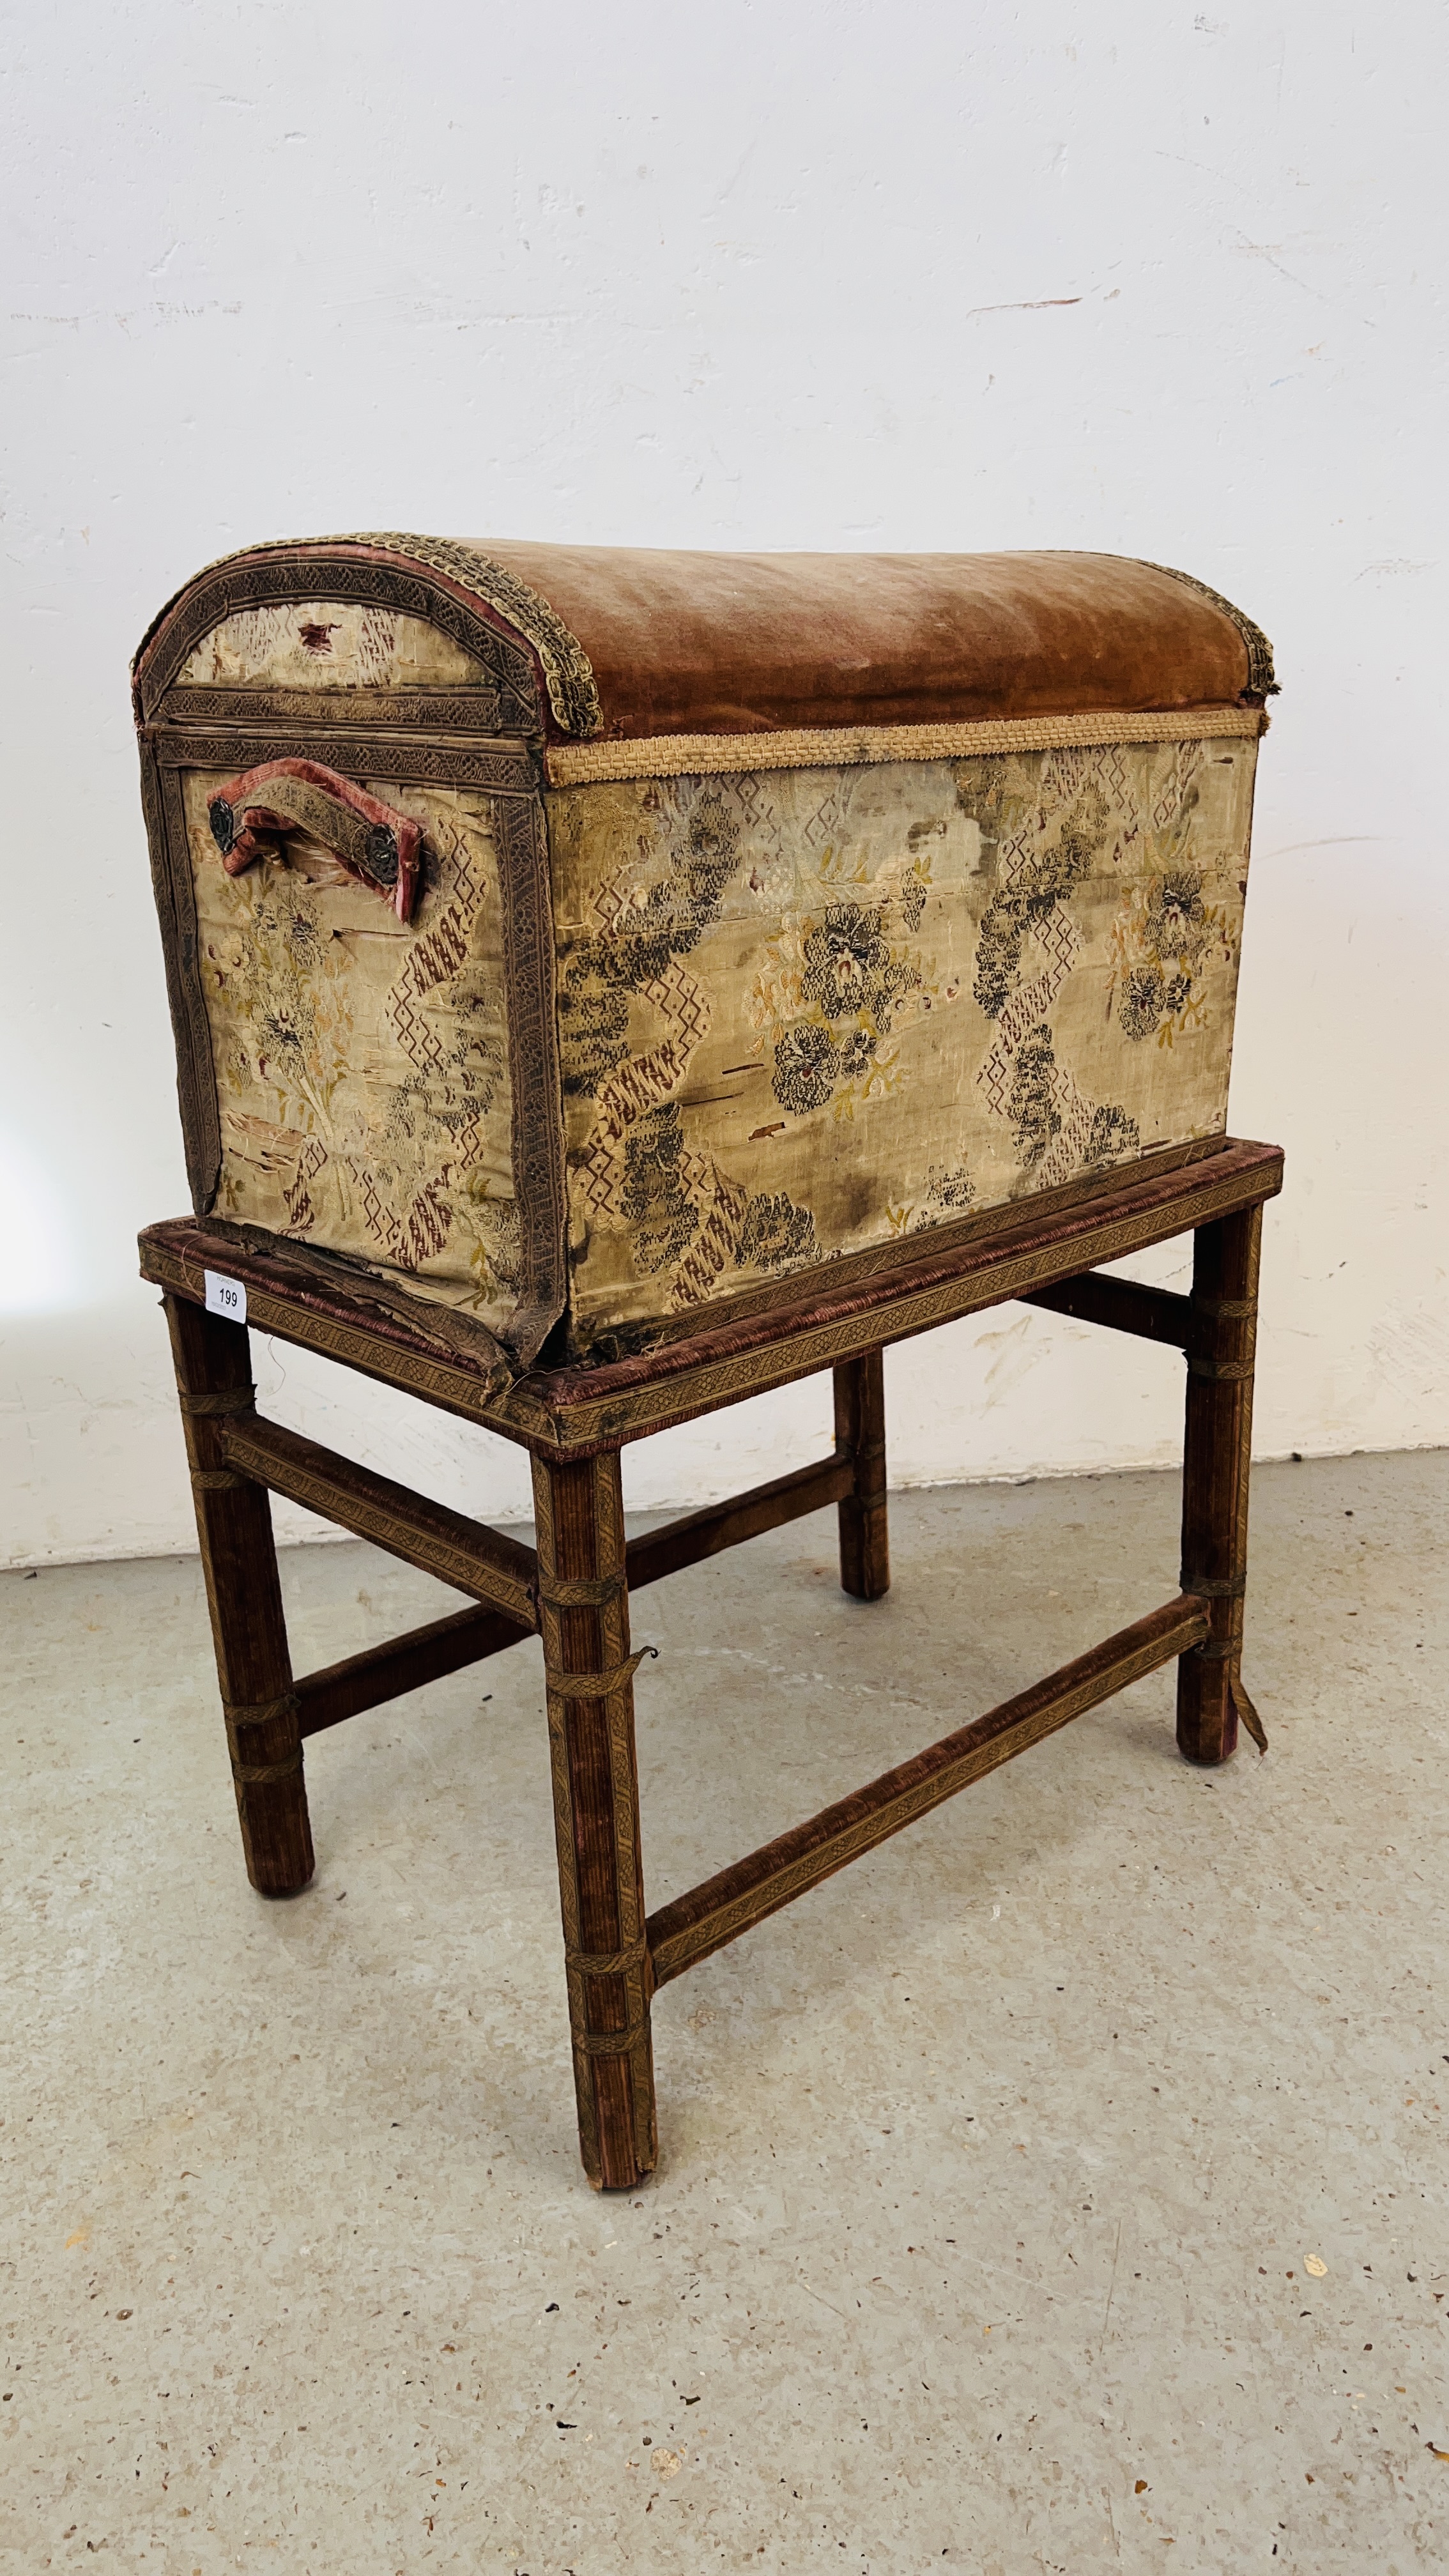 A VELVET COVERED DOME TOP TREASURY TRUNK ON STAND (BOX W 53CM. D 33CM.